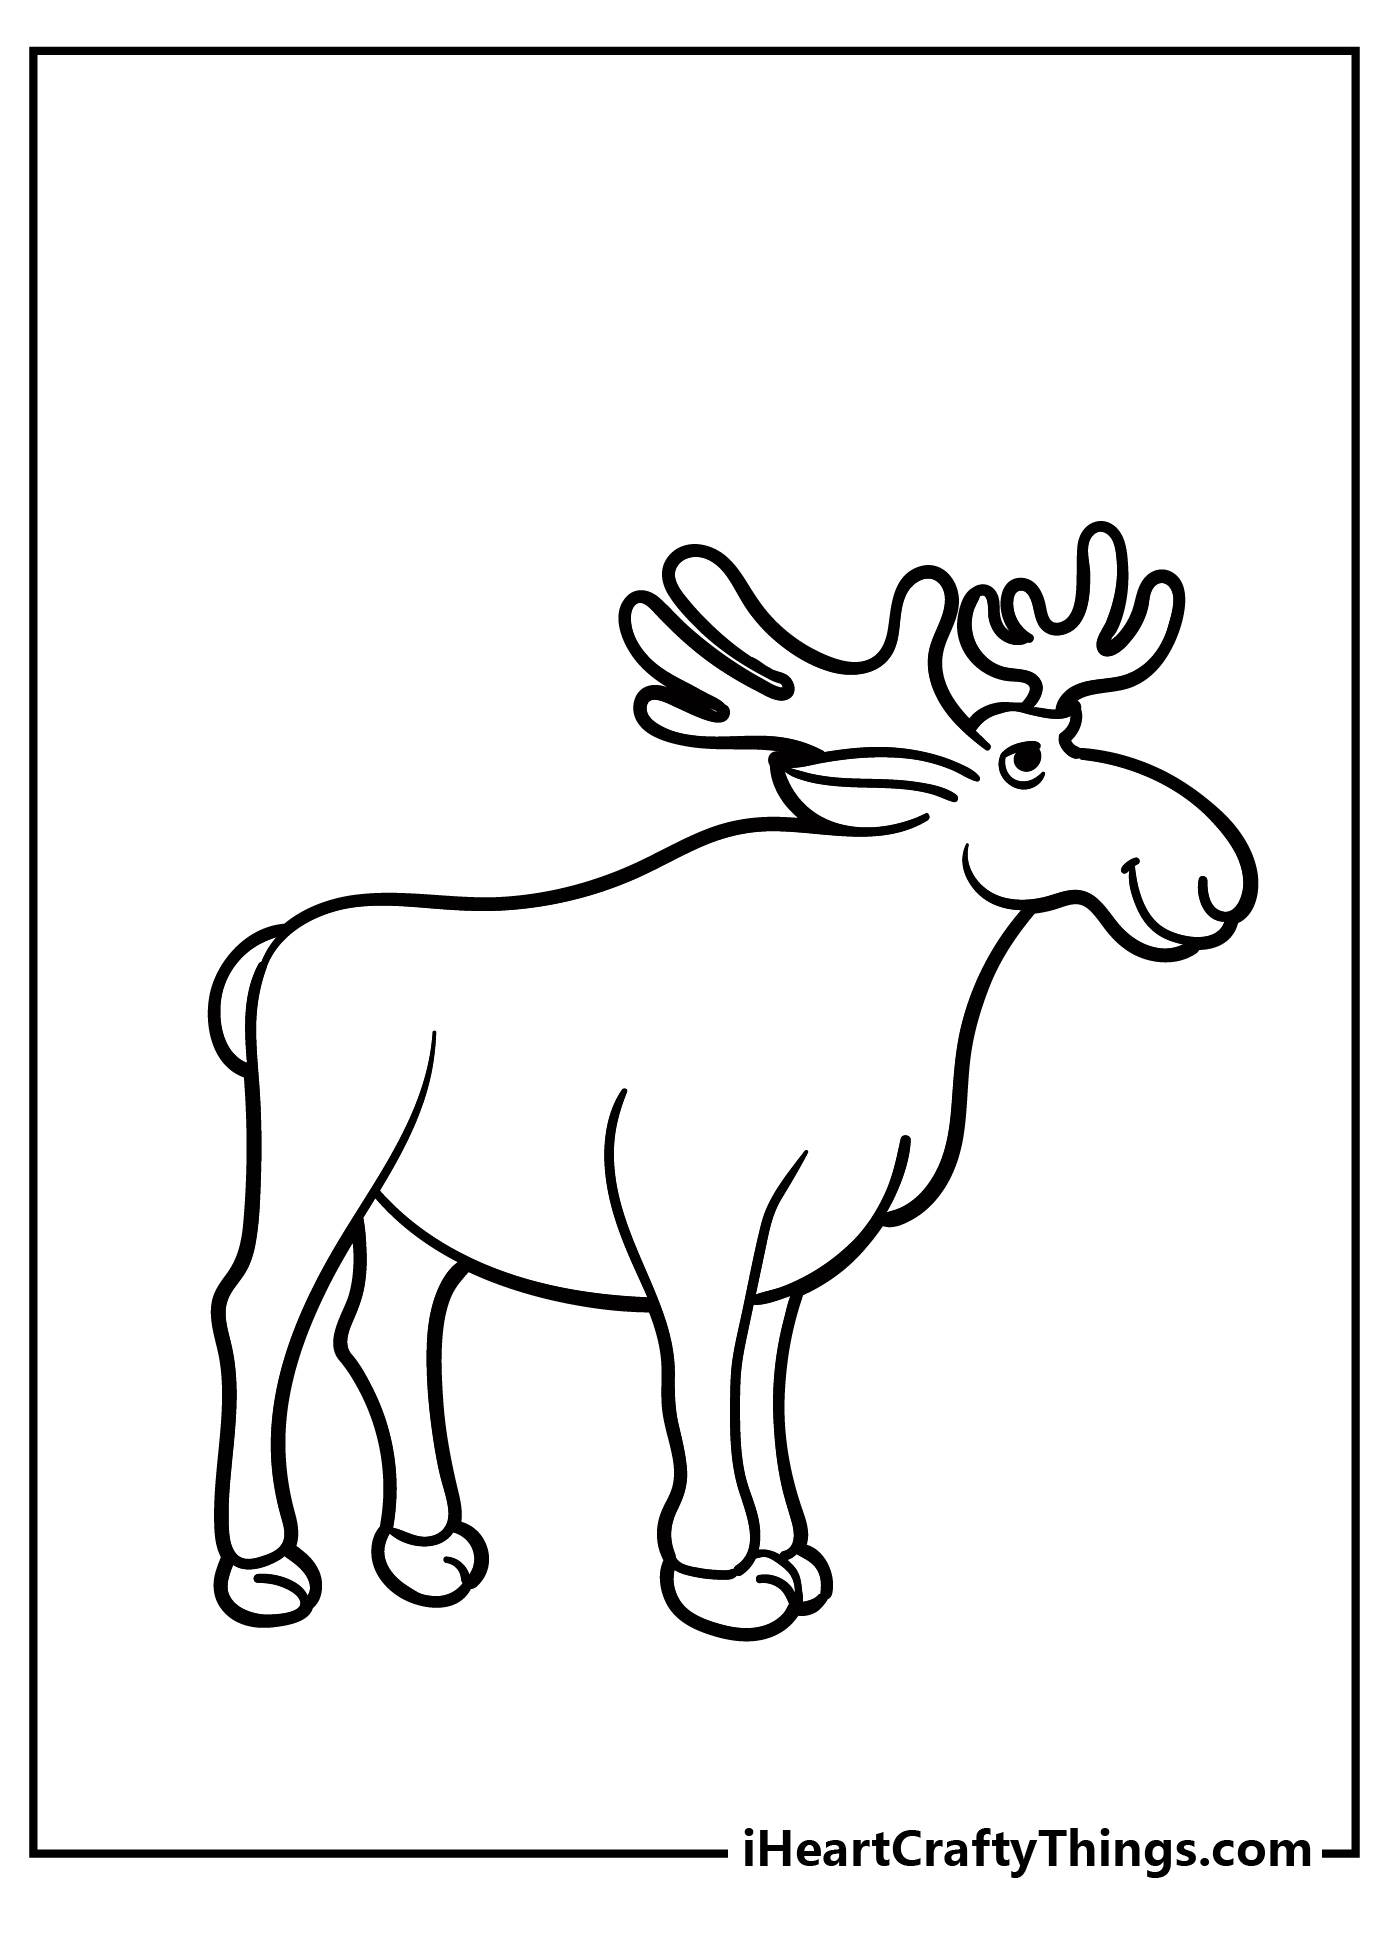 Moose Coloring Pages for preschoolers free printable